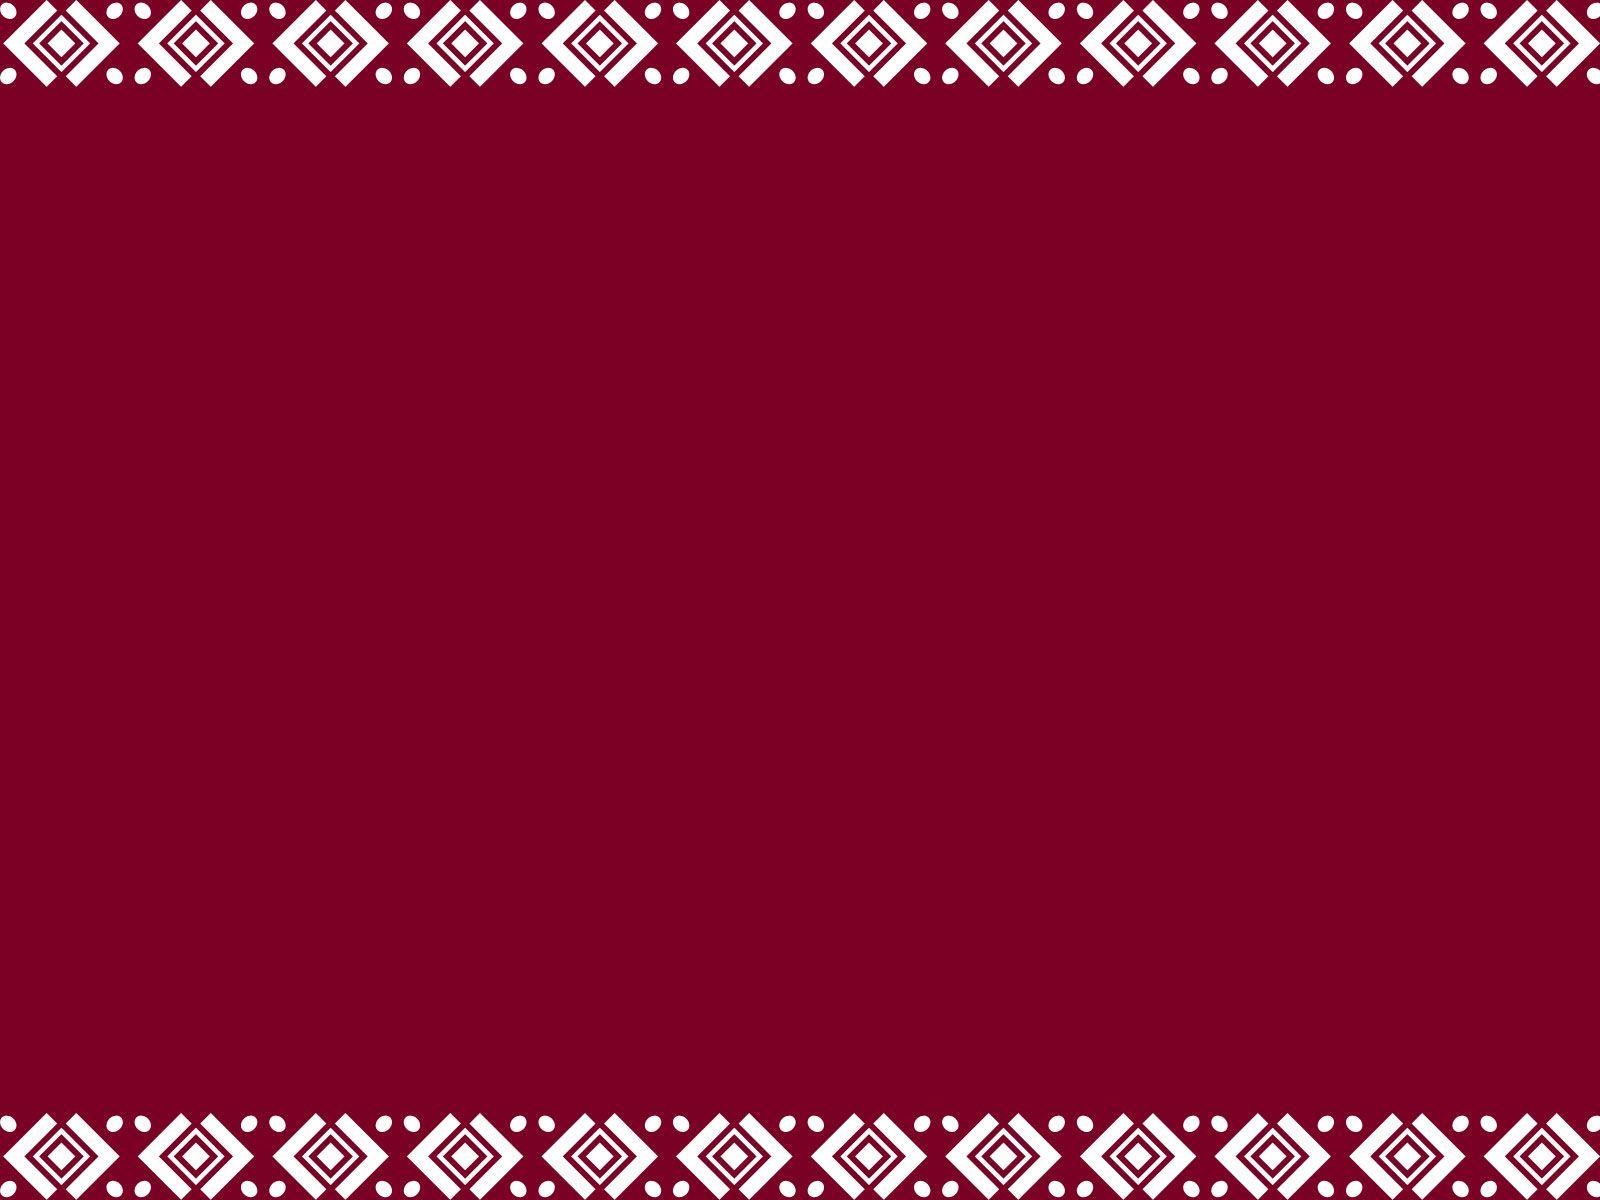 Maroon Border Ppt background for Powerpoint